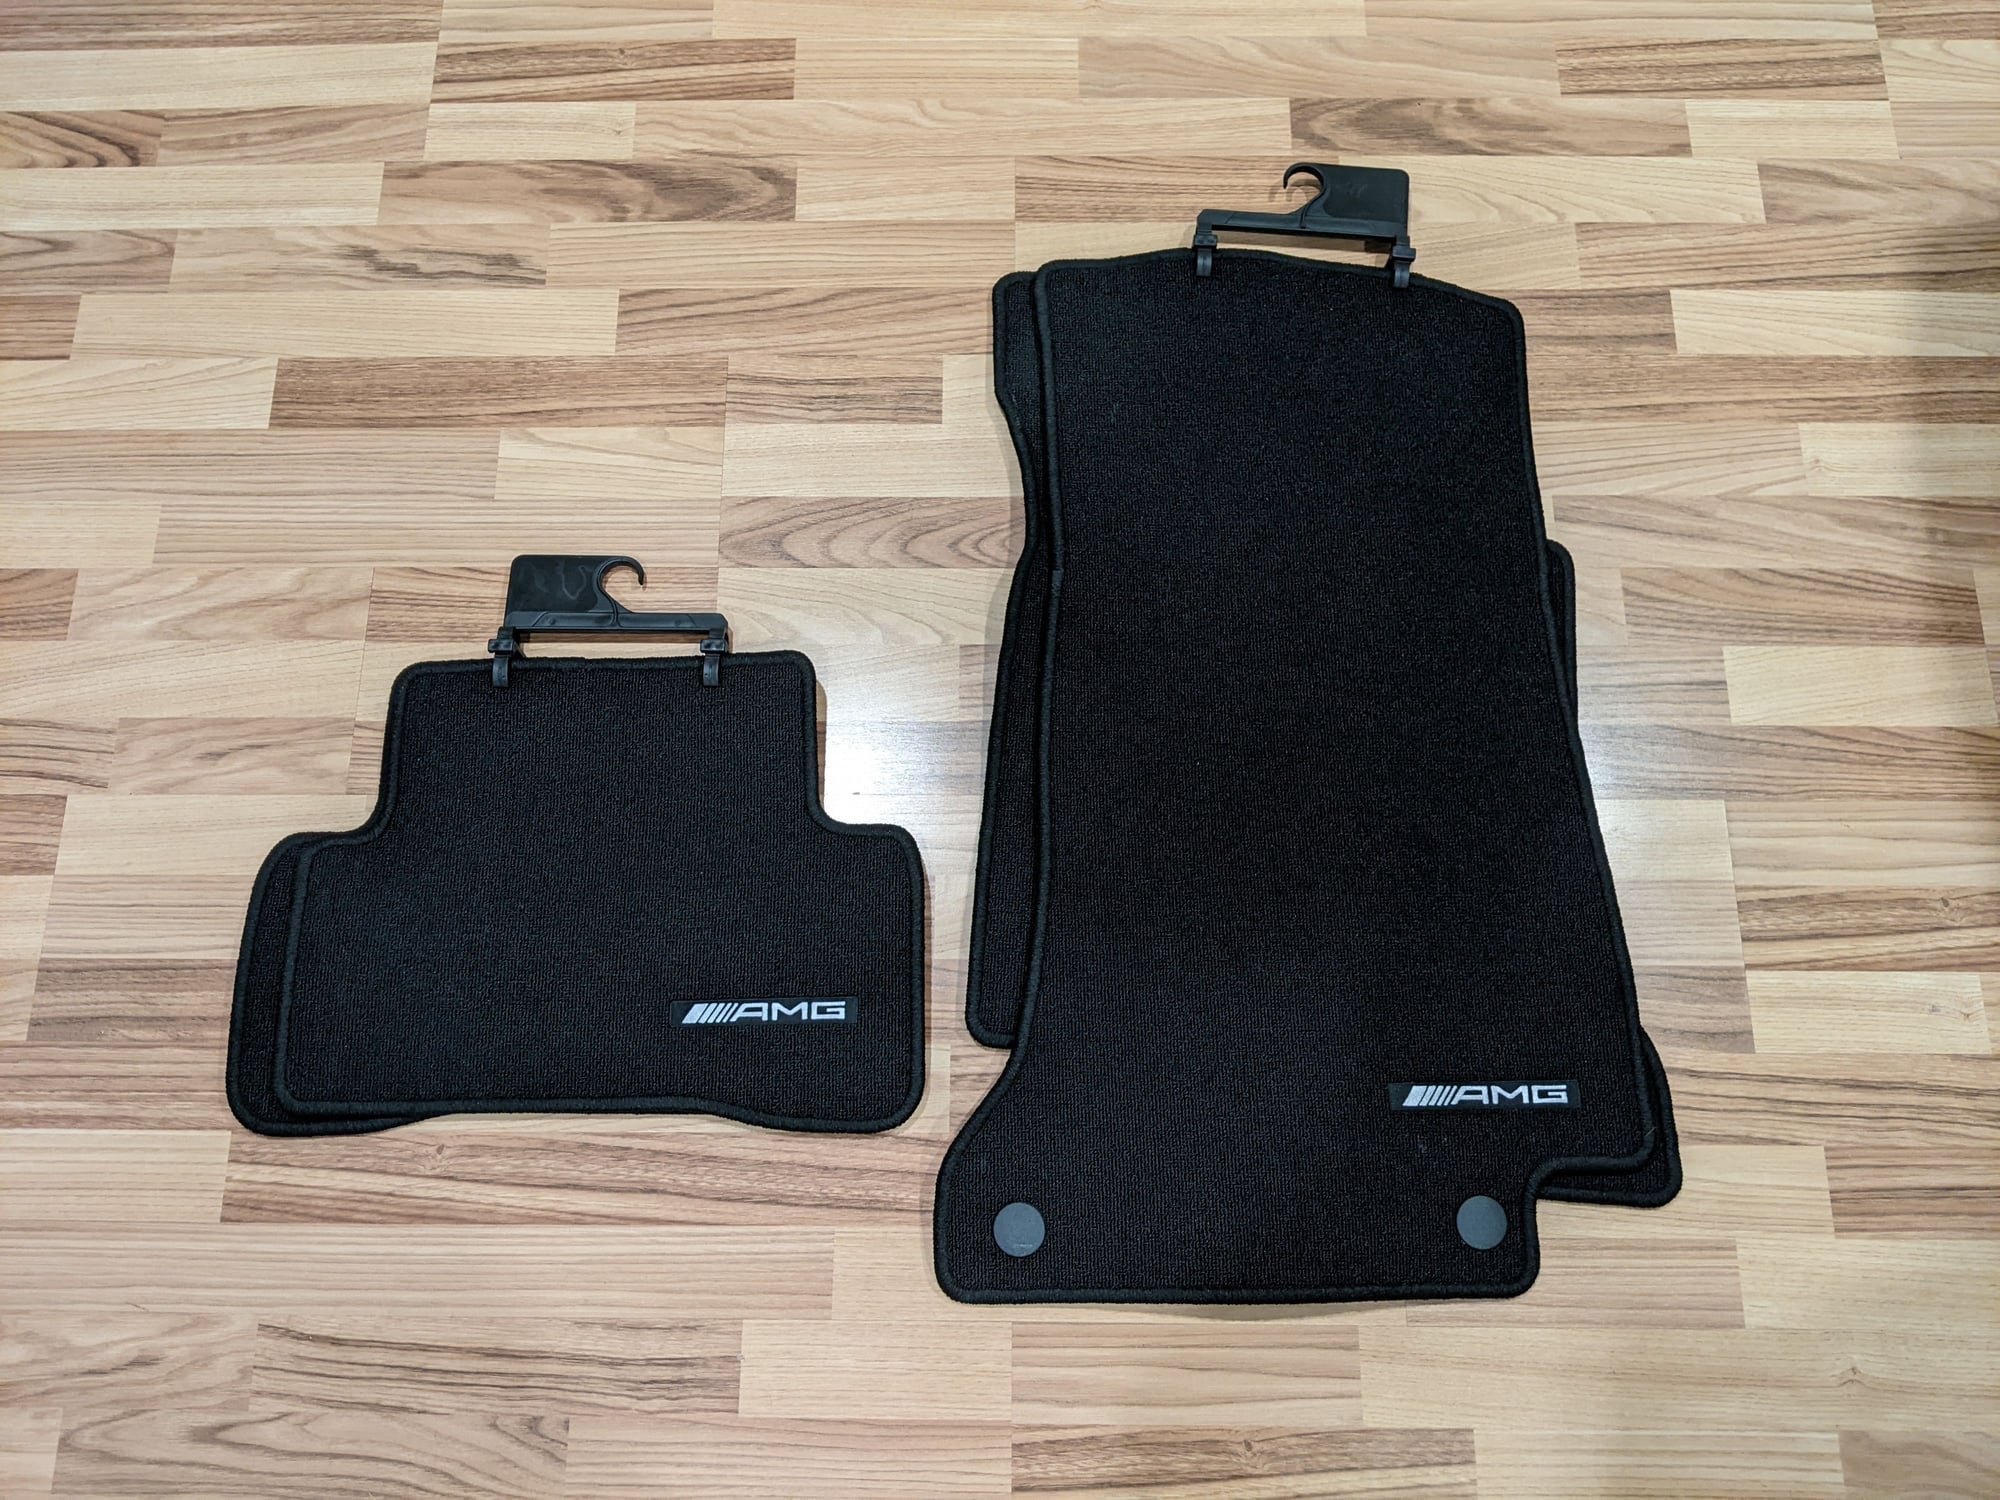 Interior/Upholstery - Brand New Genuine MB-AMG Floor Mats - New - 2015 to 2021 Mercedes-Benz C-Class - Clifton, VA 20124, United States